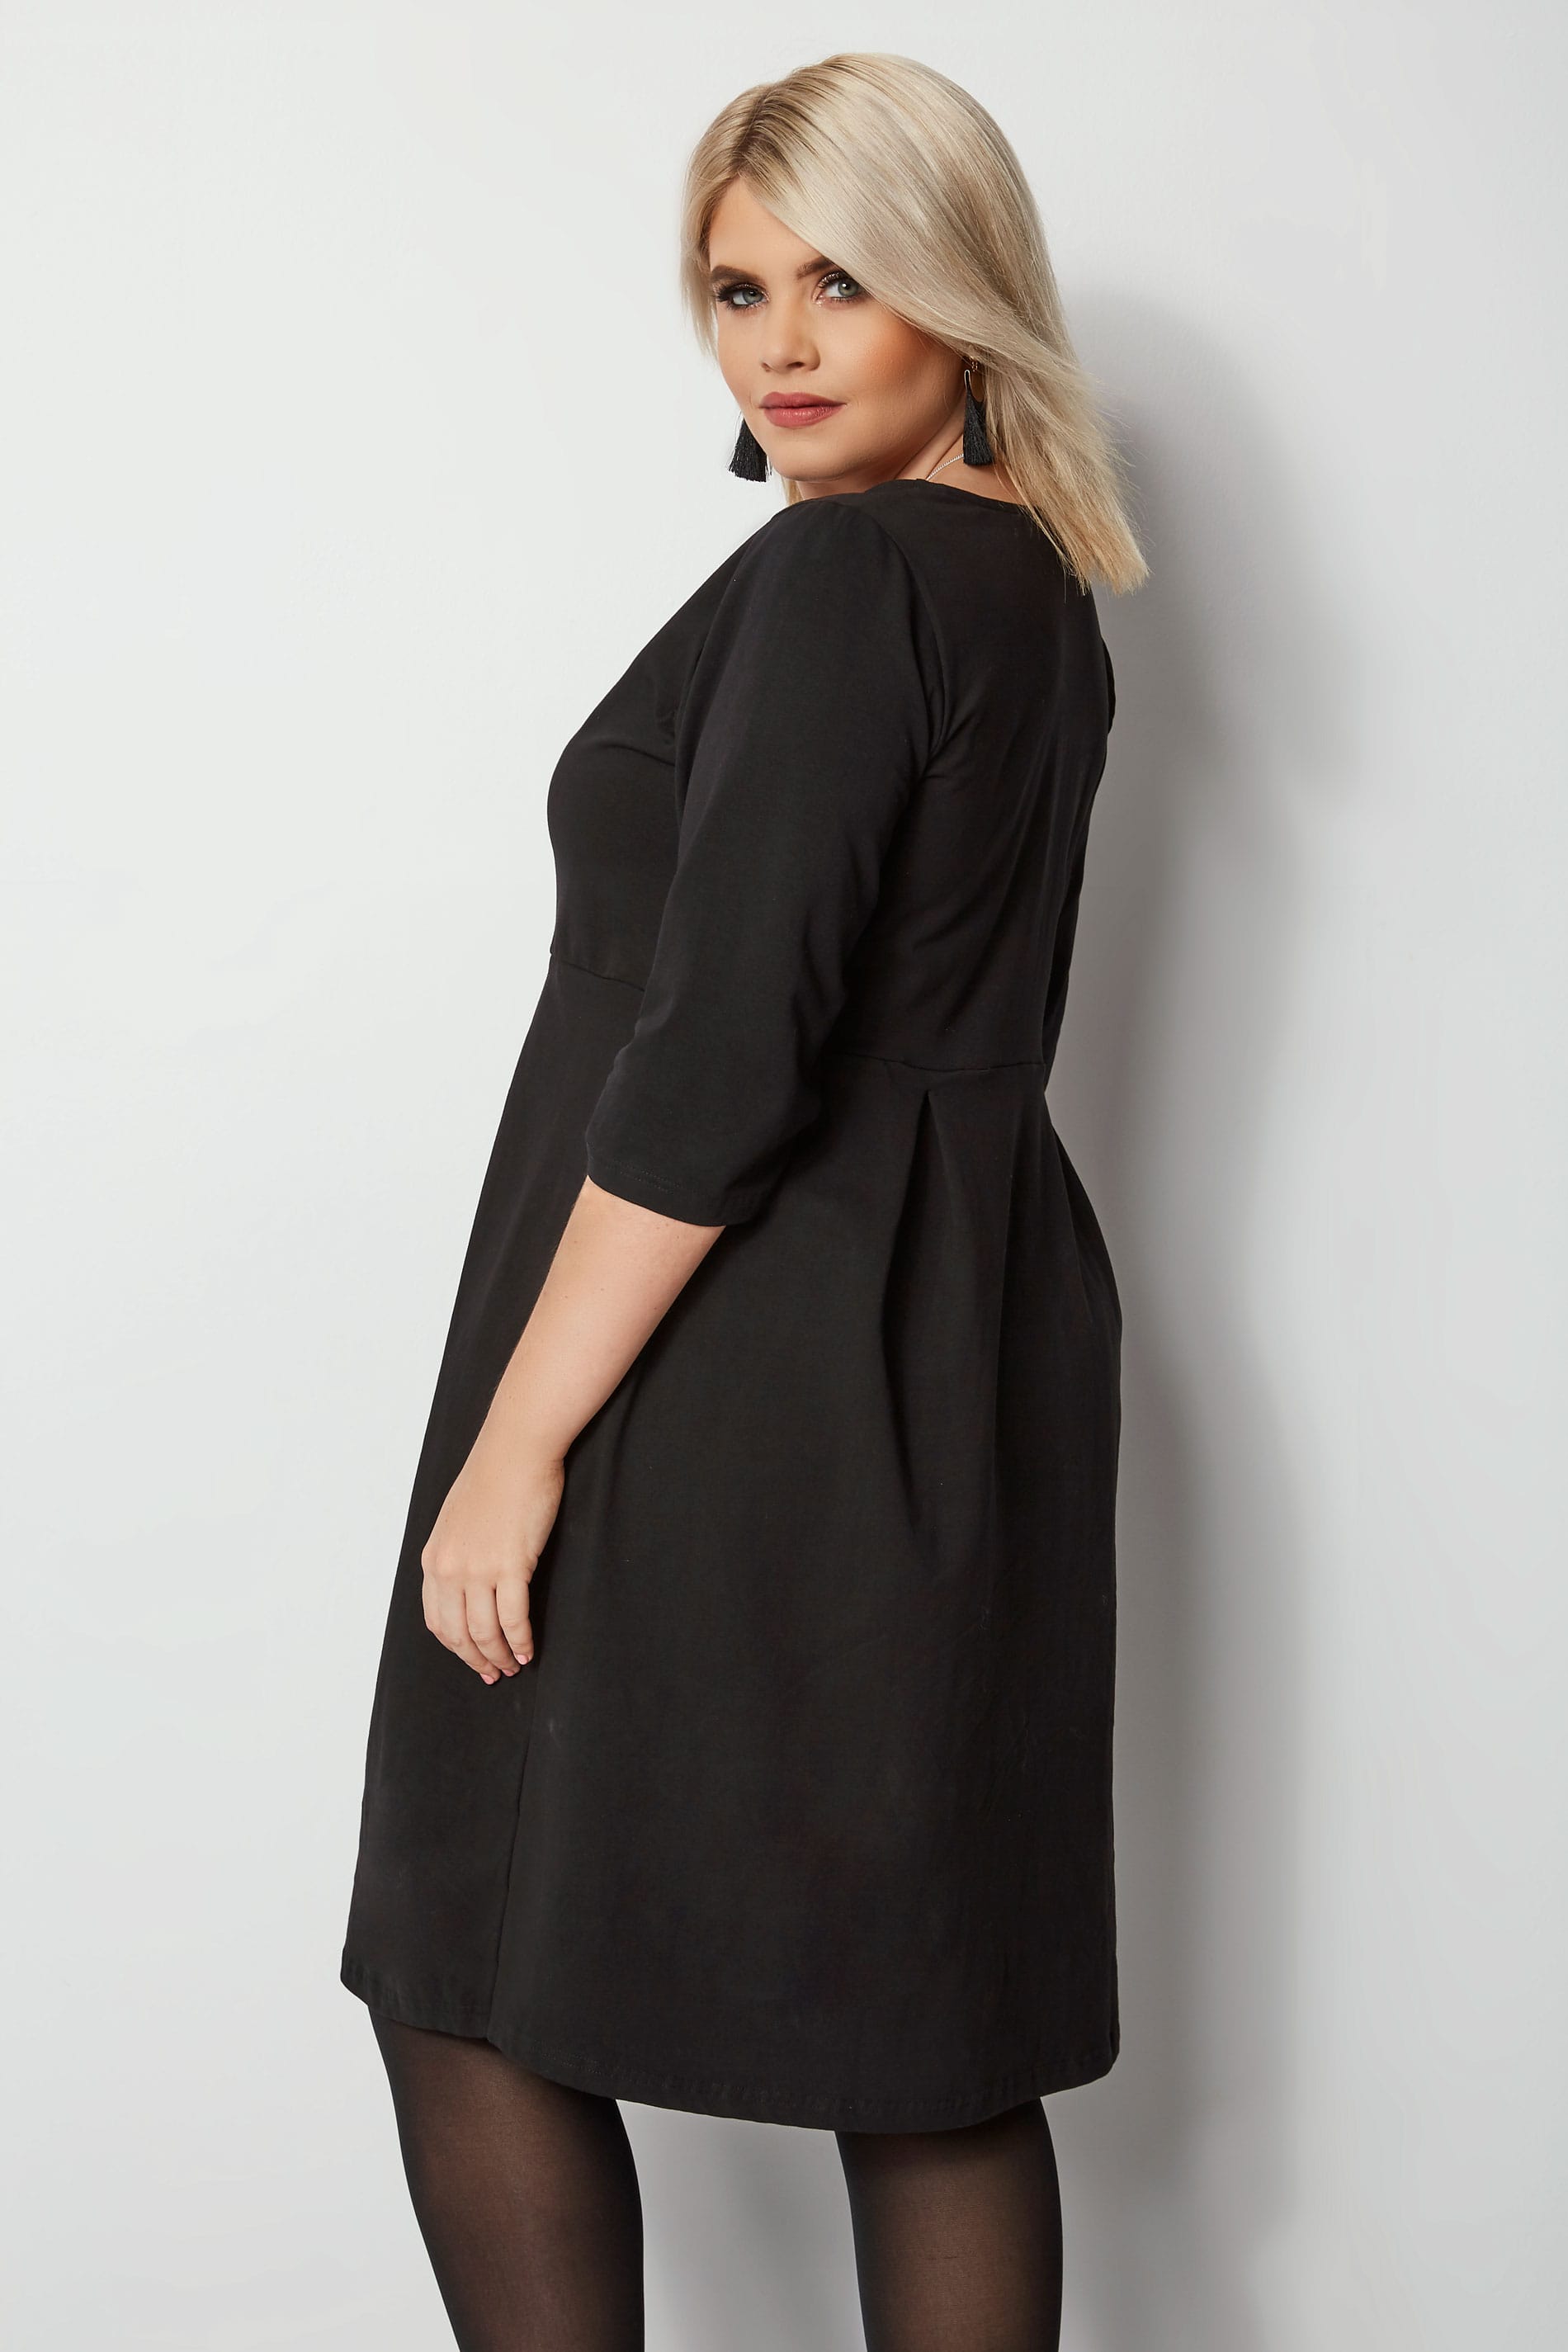 Black Skater Dress, Plus size 16 to 36 | Yours Clothing